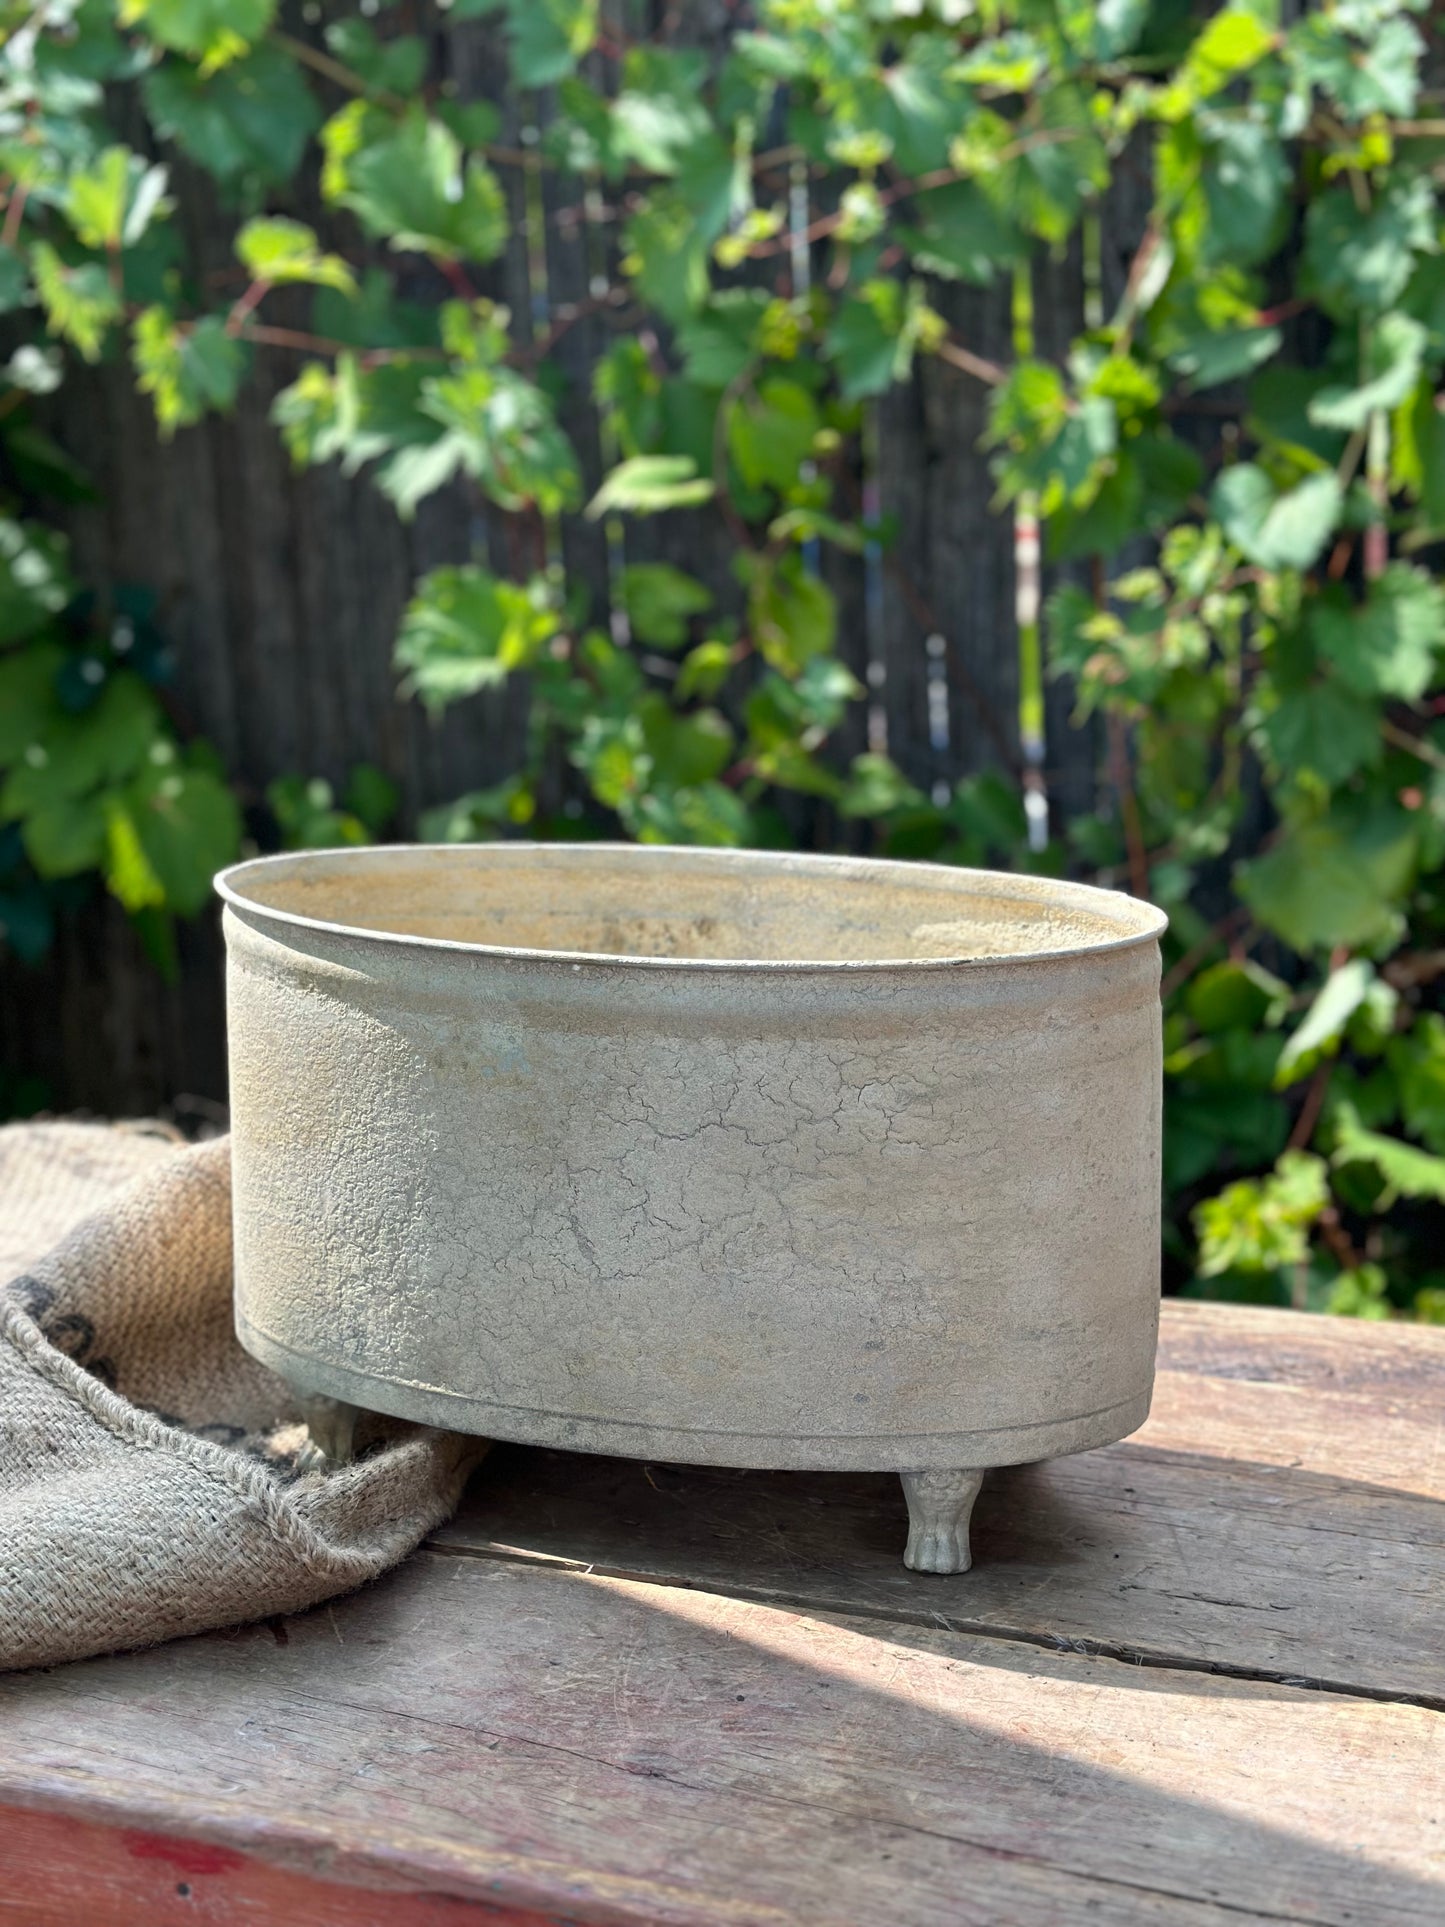 Distressed Metal - Cream Oval Planter with Feet